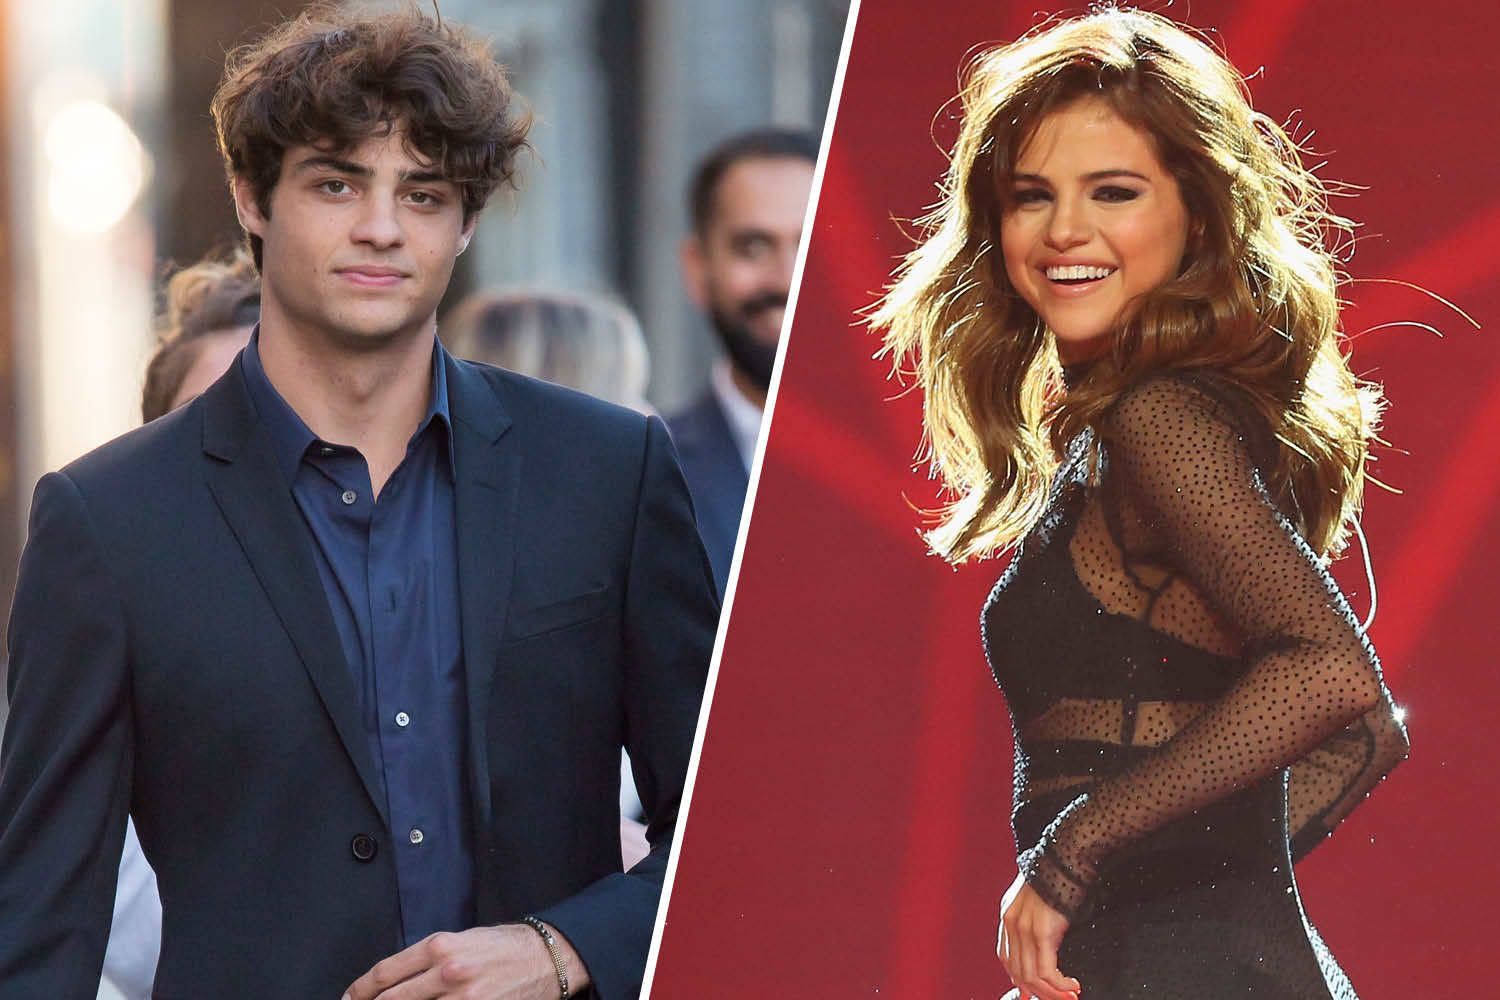 Are Noah Centineo And Selena Gomez Dating?